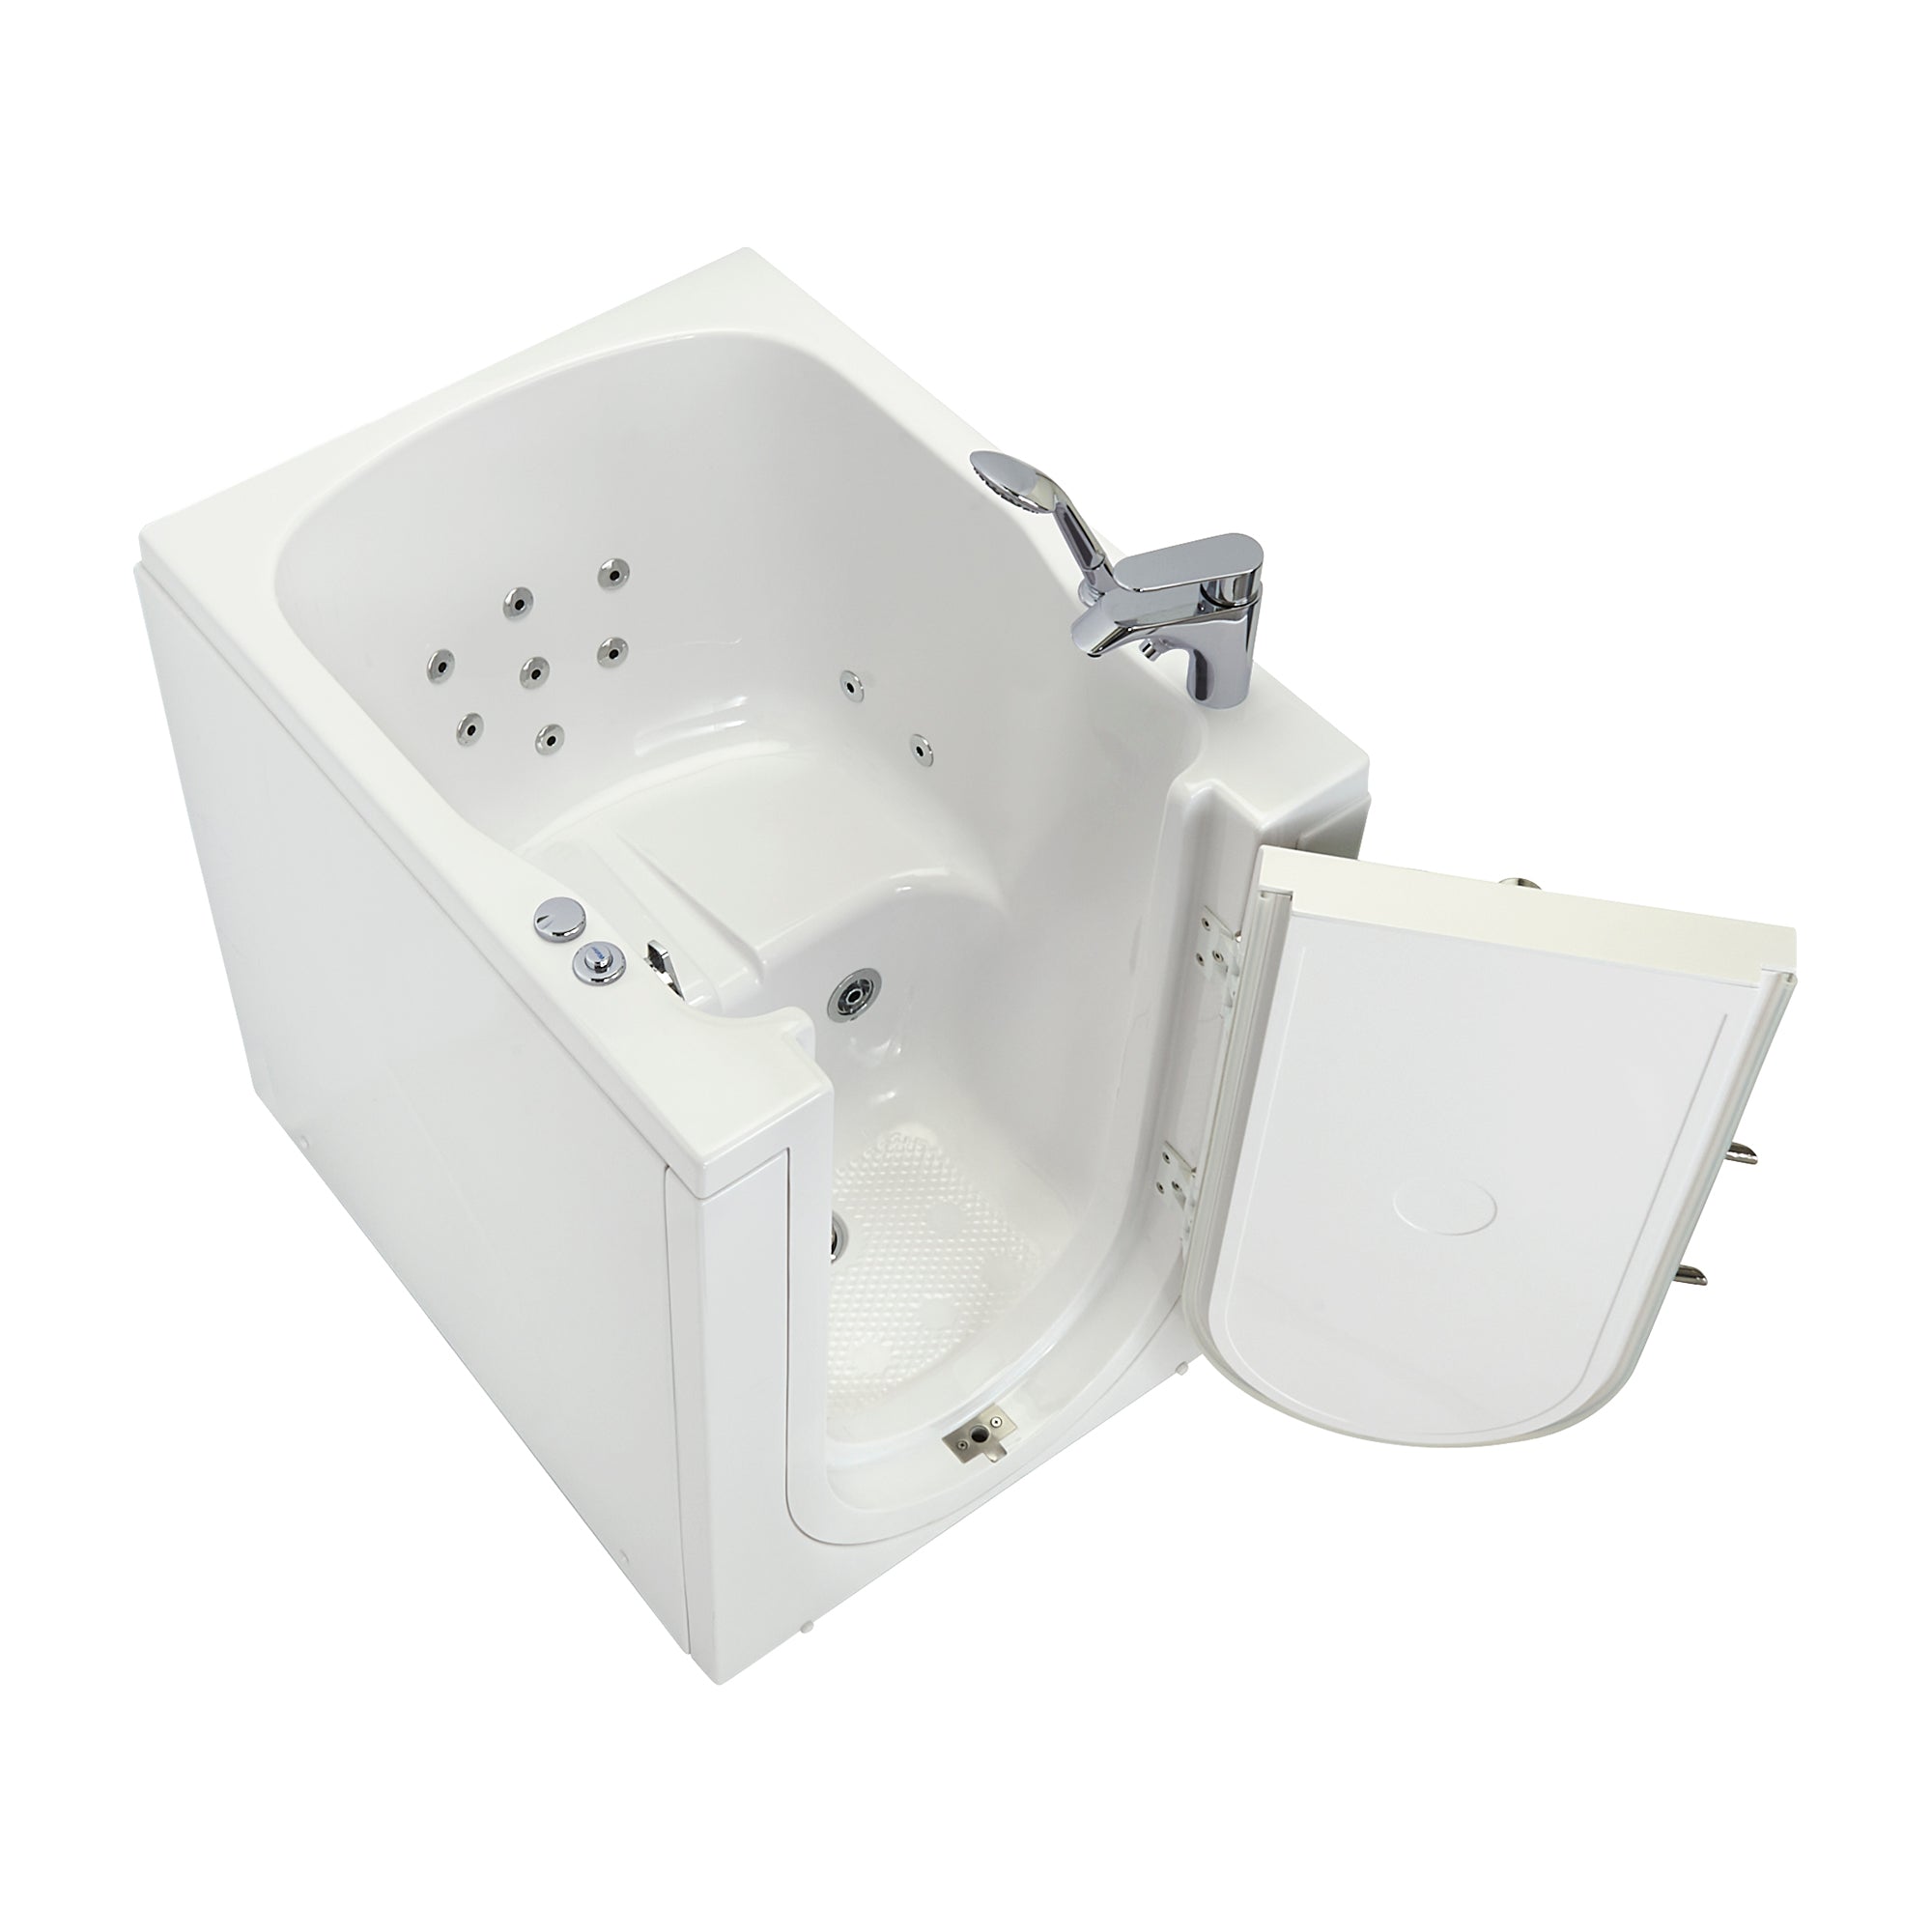 Ella Front Entry 32"x40" Acrylic Hydro Massage Walk-In Bathtub with Outward Swing Door Left, Fast Fill Faucet, 2" Drain in a white background